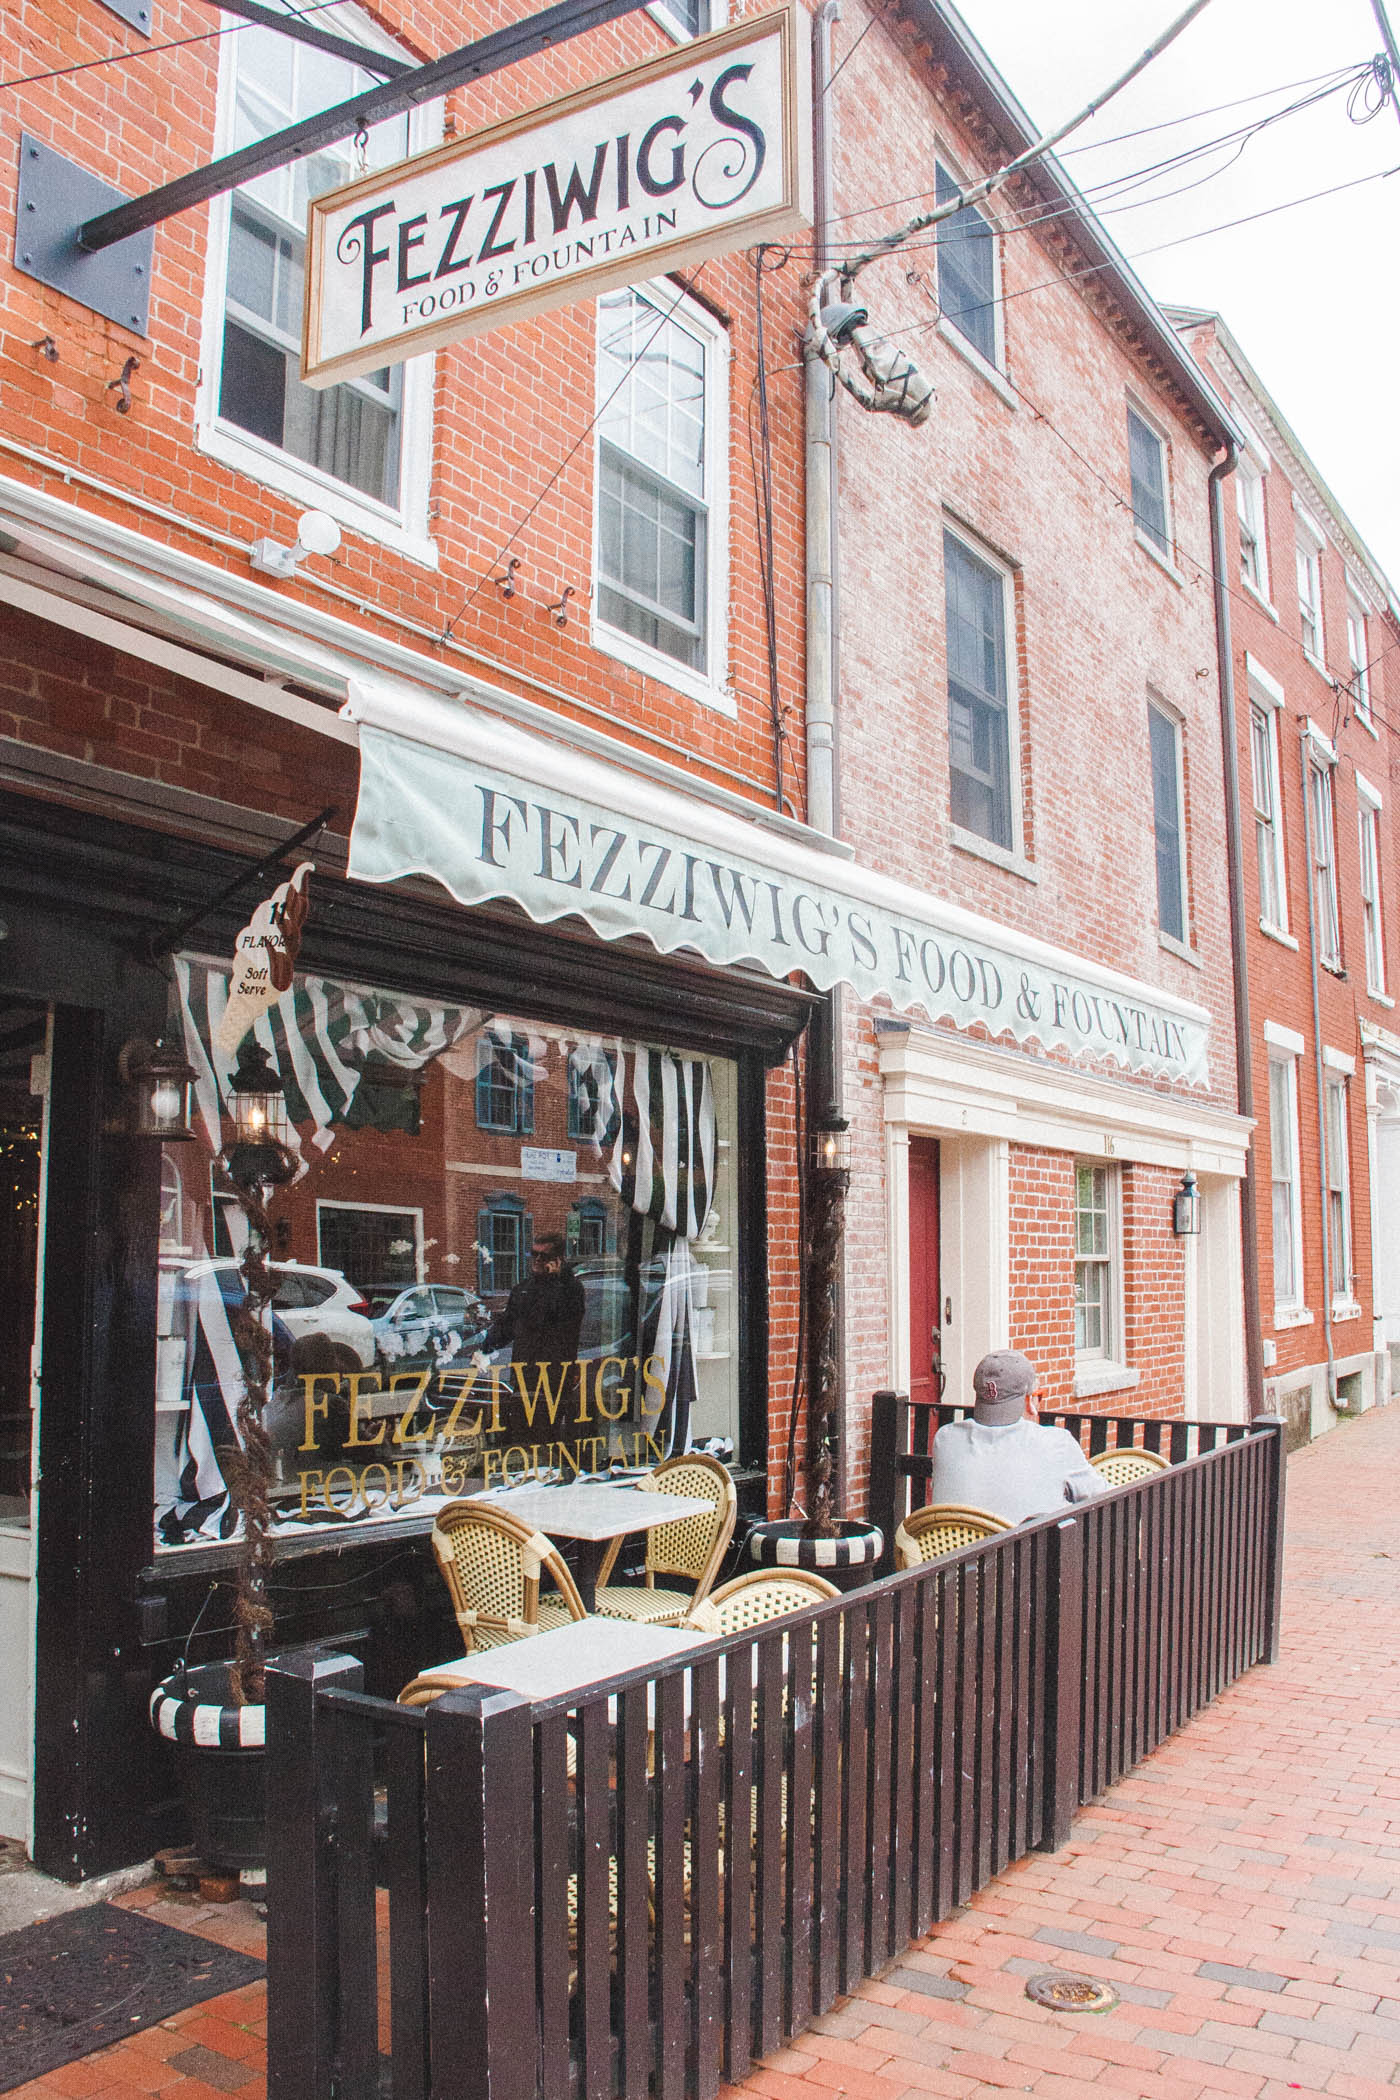 Fezziwig's Food and Fountain